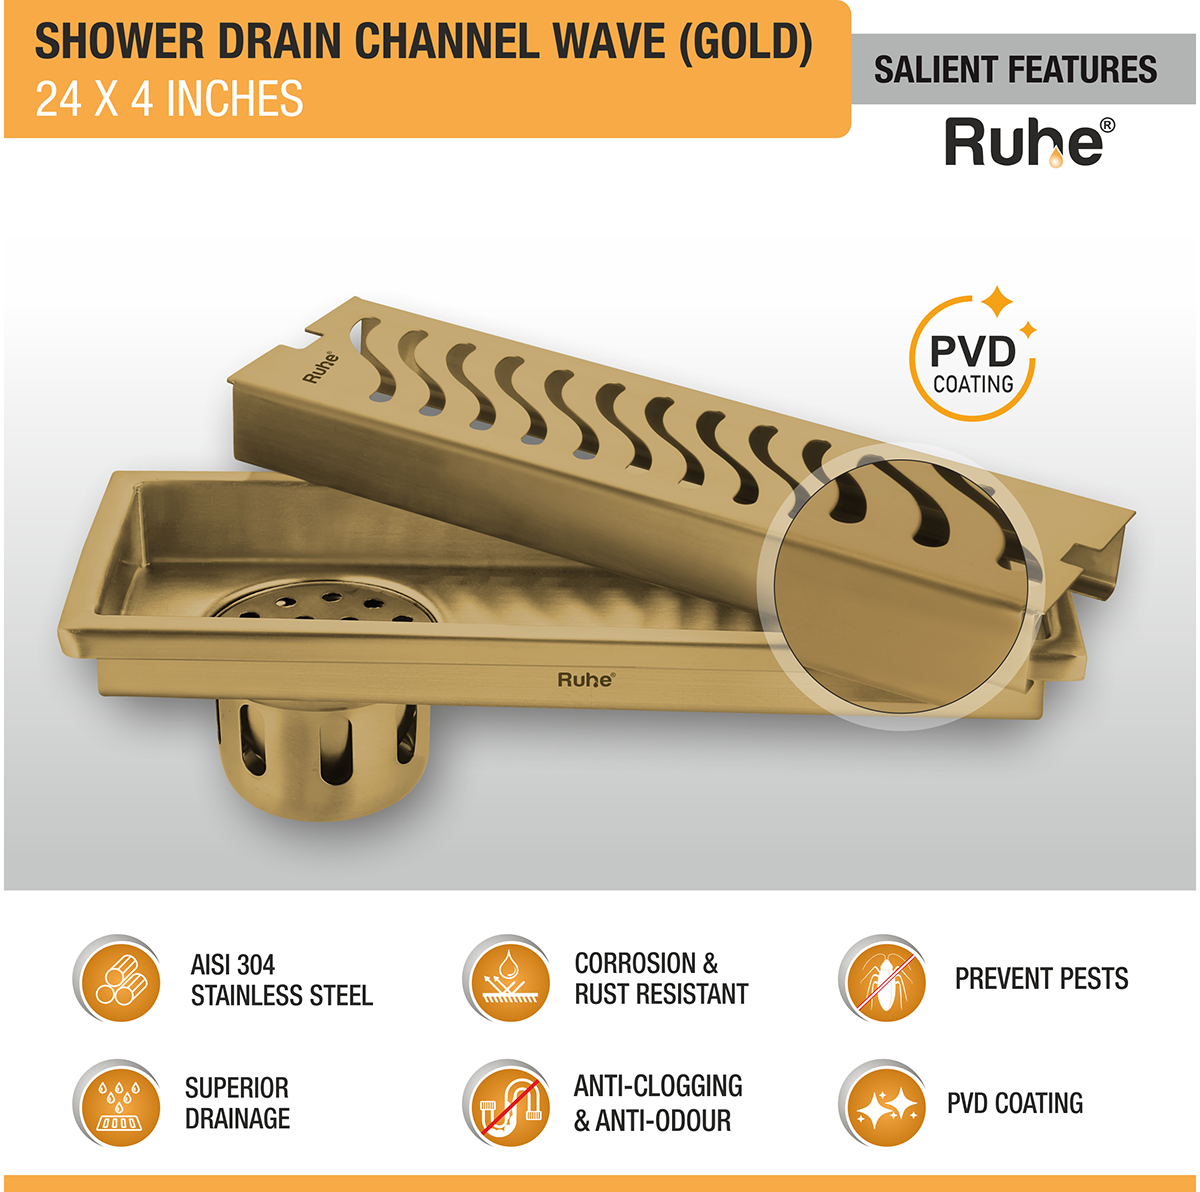 Wave Shower Drain Channel (24 x 4 Inches) YELLOW GOLD features